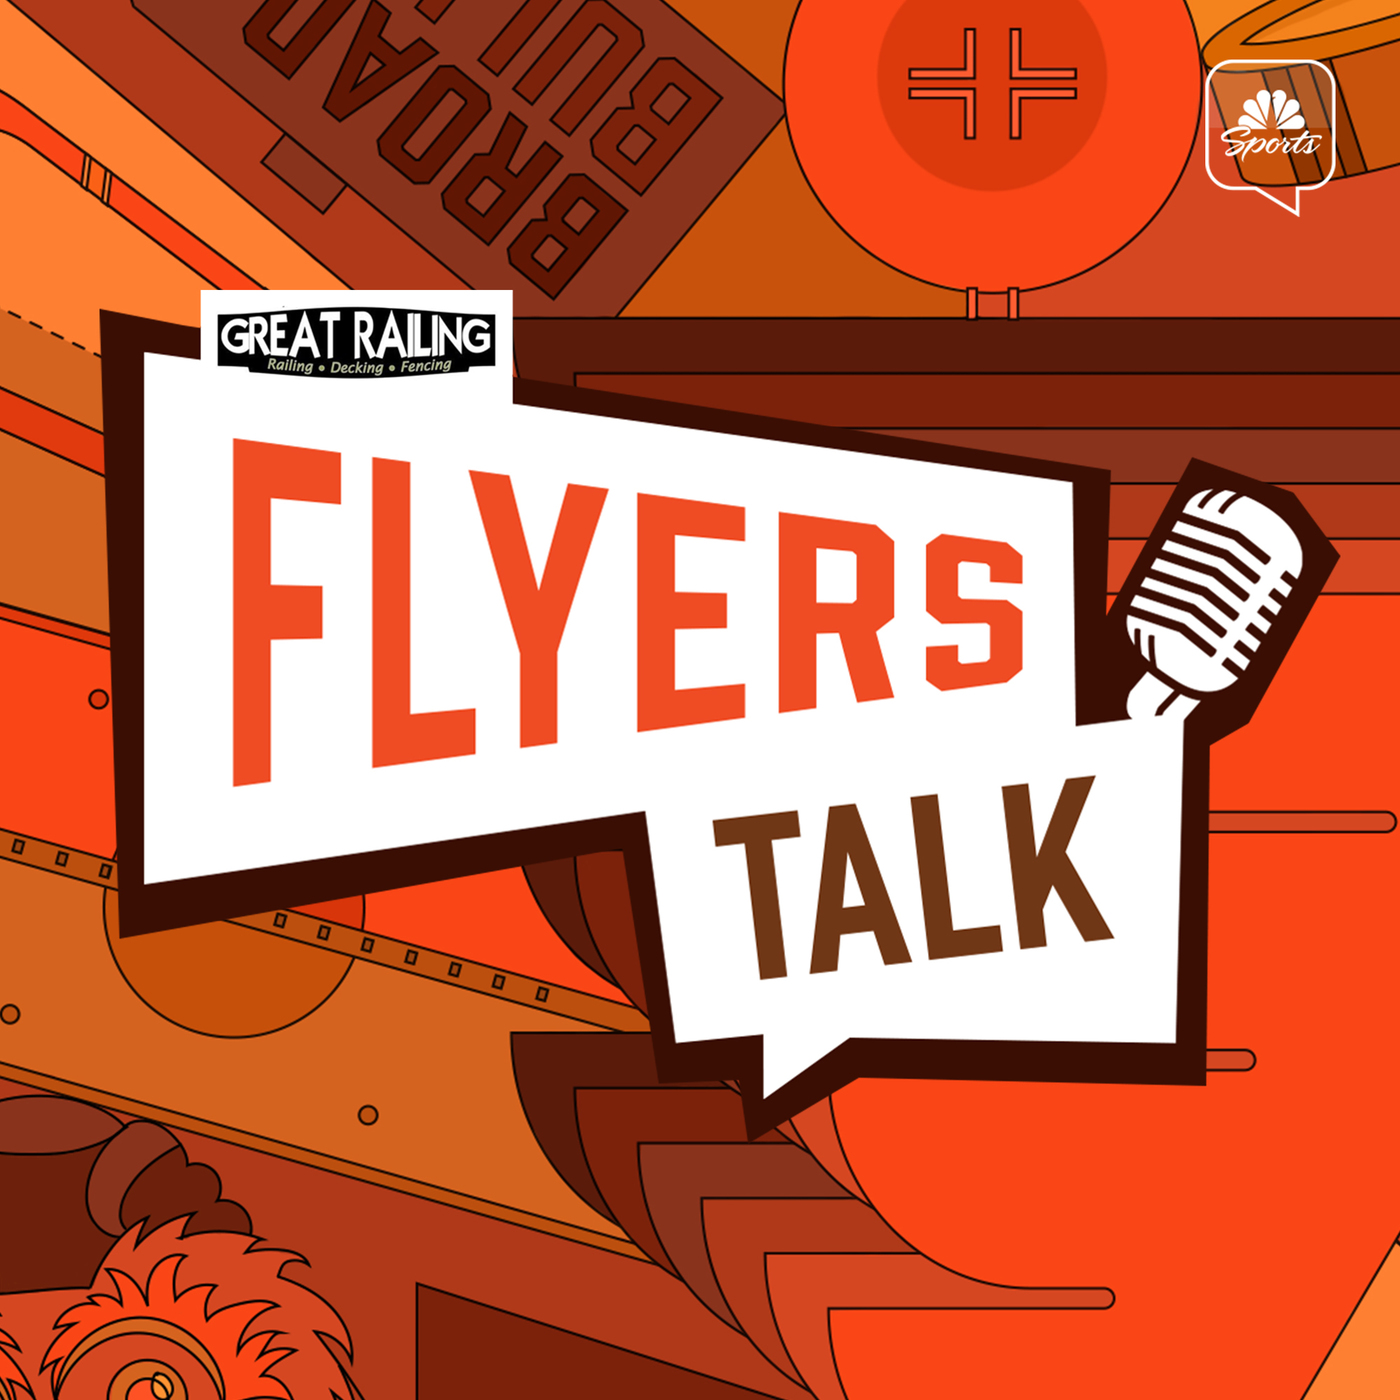 3 Flyers prospects who could surprise in 2023-24 season